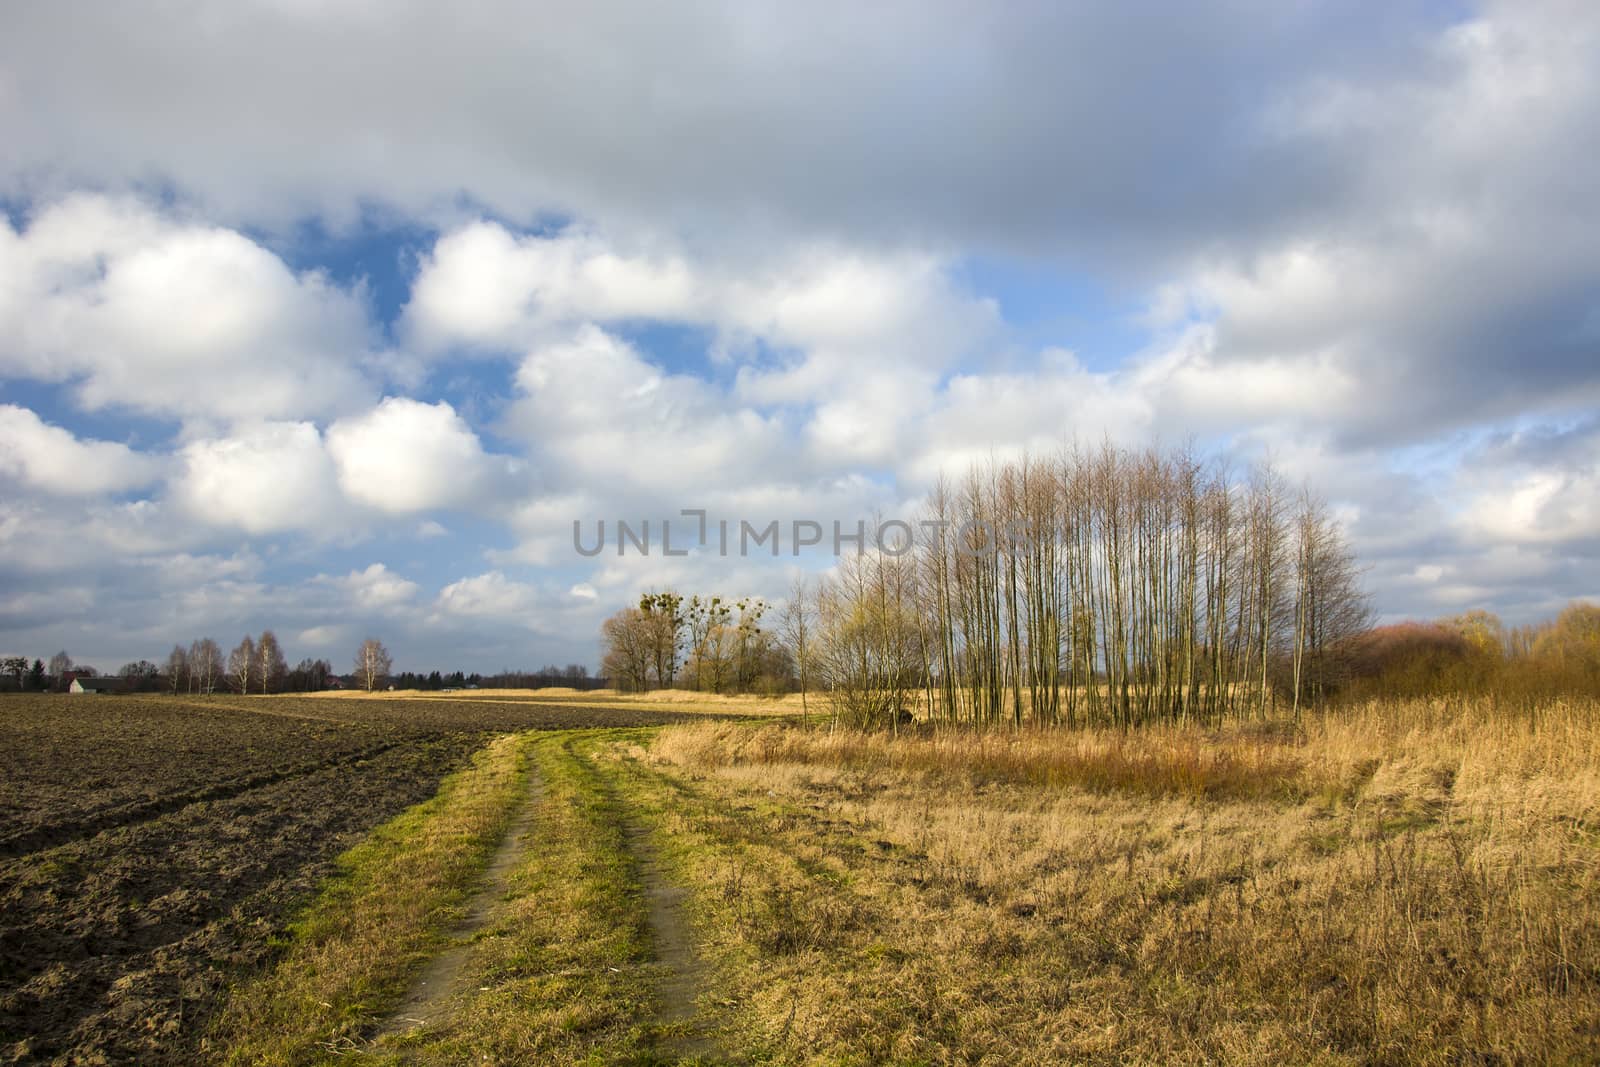 Dirt road next to a plowed field, autumn trees and white clouds on a sky by darekb22